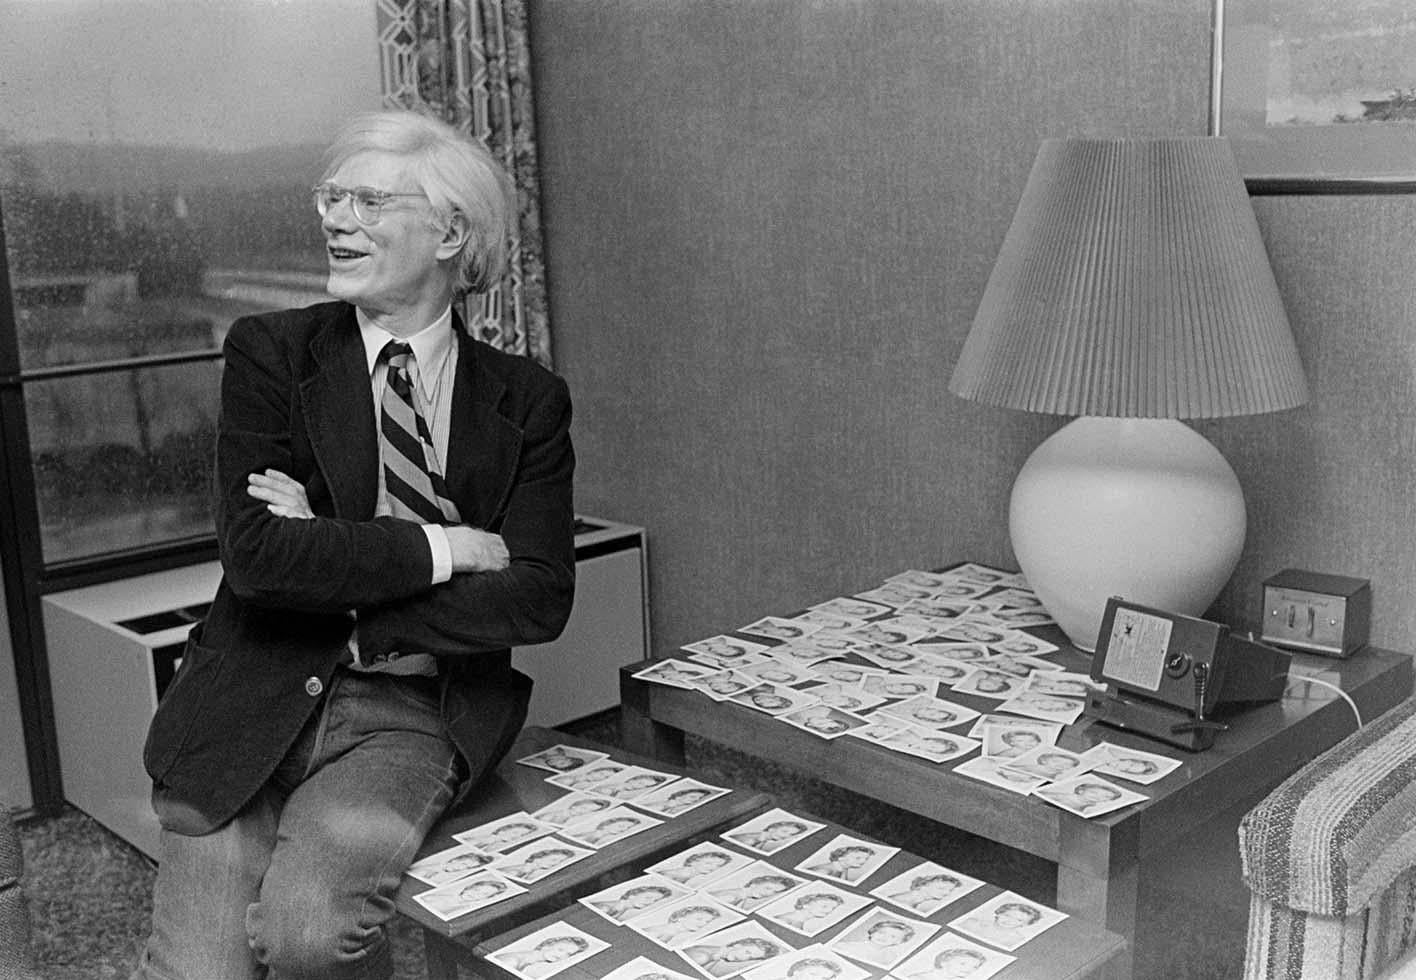 Rowland Scherman Black and White Photograph – Andy Warhol